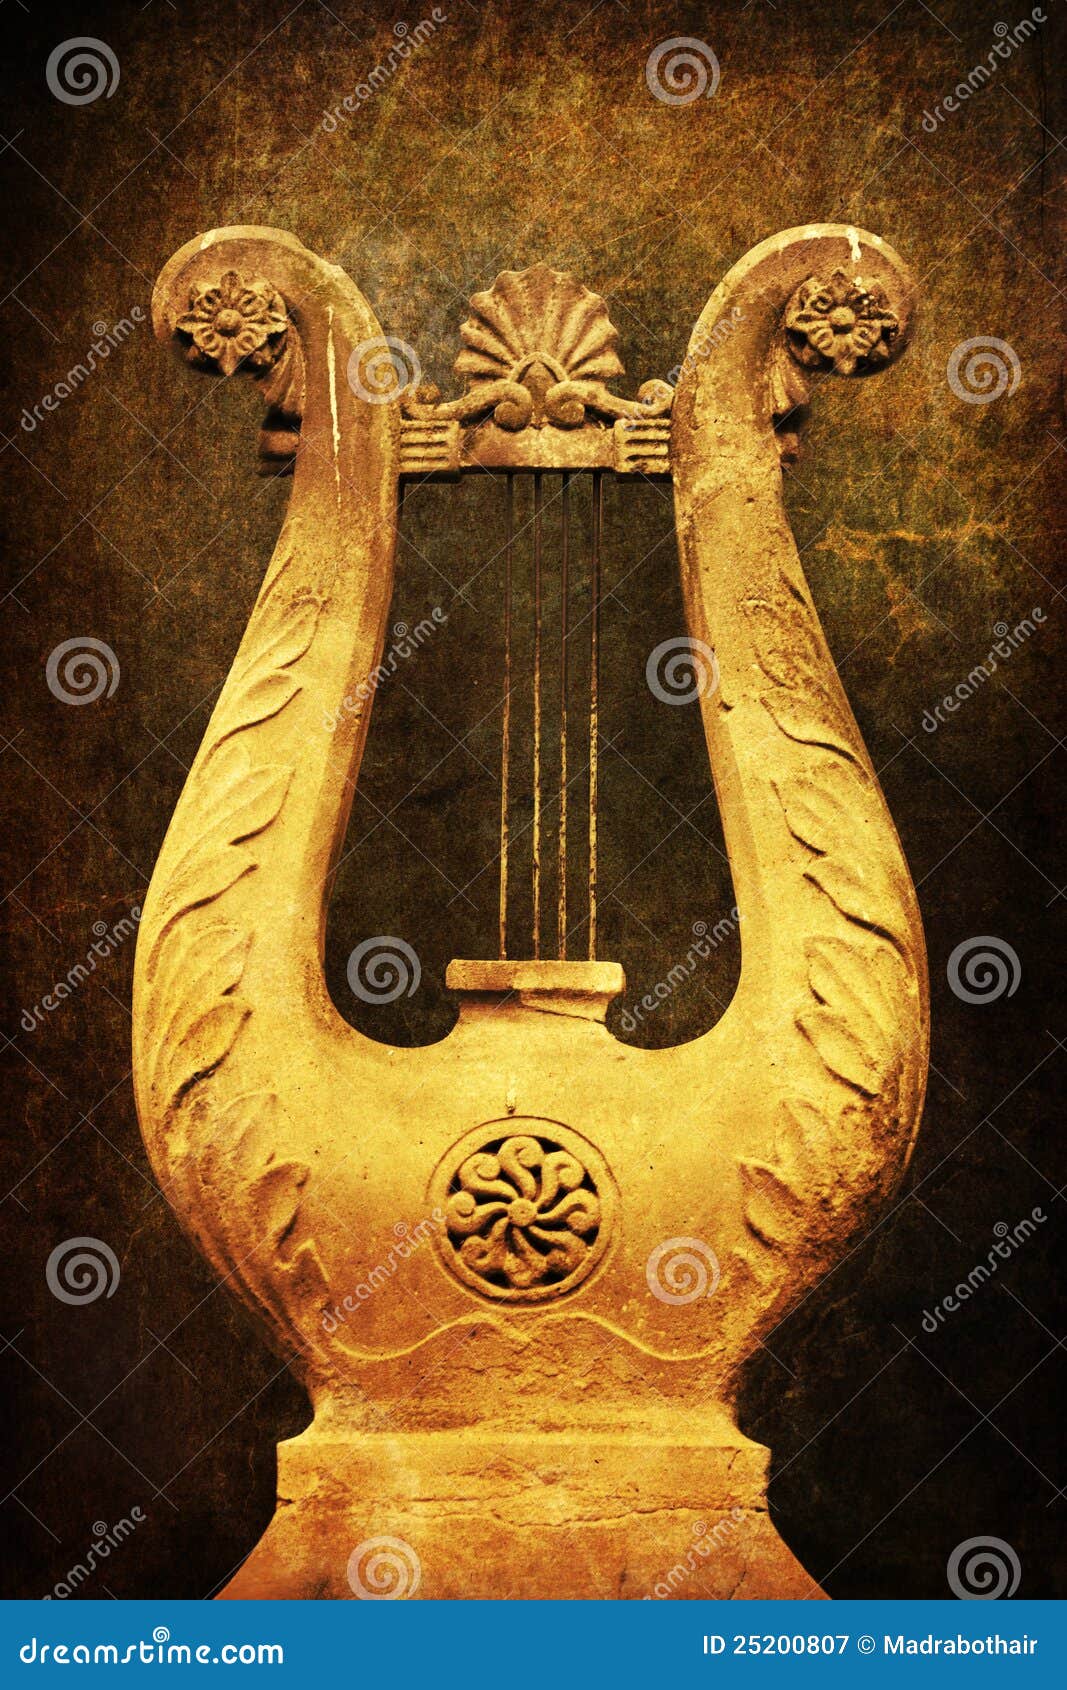 Ancient Harp Royalty Free Stock Photography - Image: 25200807